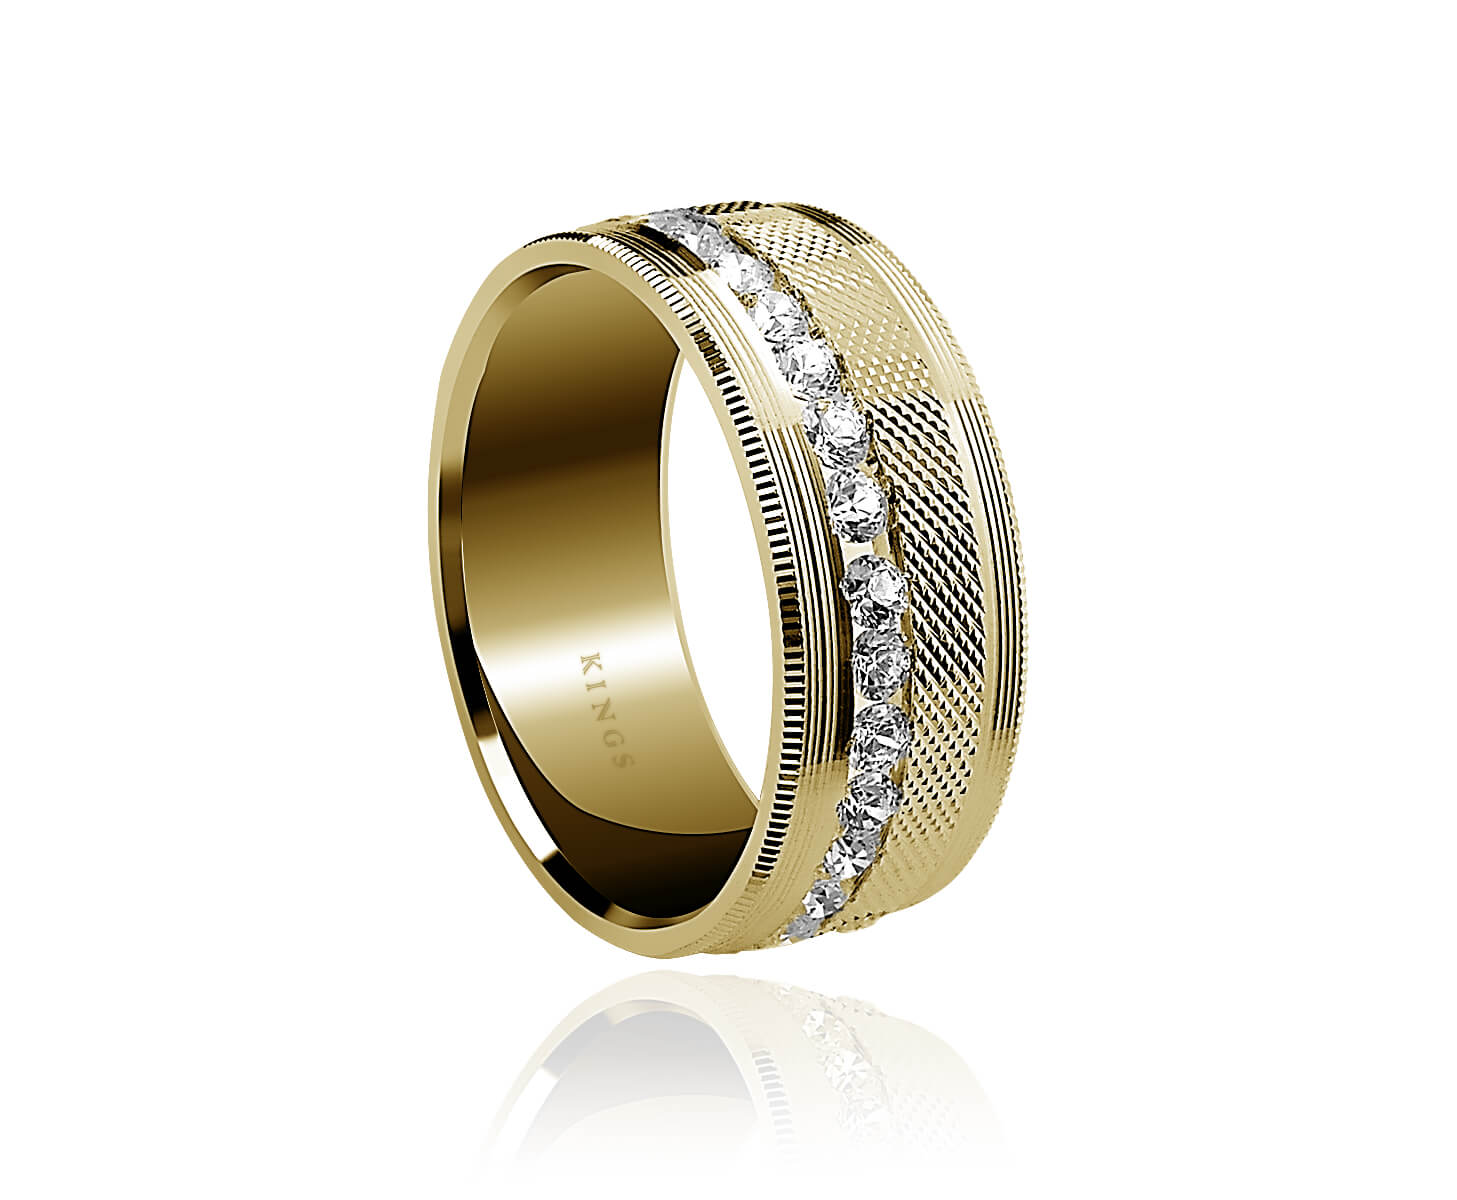 Iced Mens Ring Men's 8.50mm Textured Yellow Gold Ring with approximately 1.3 carat of brilliant cut diamonds